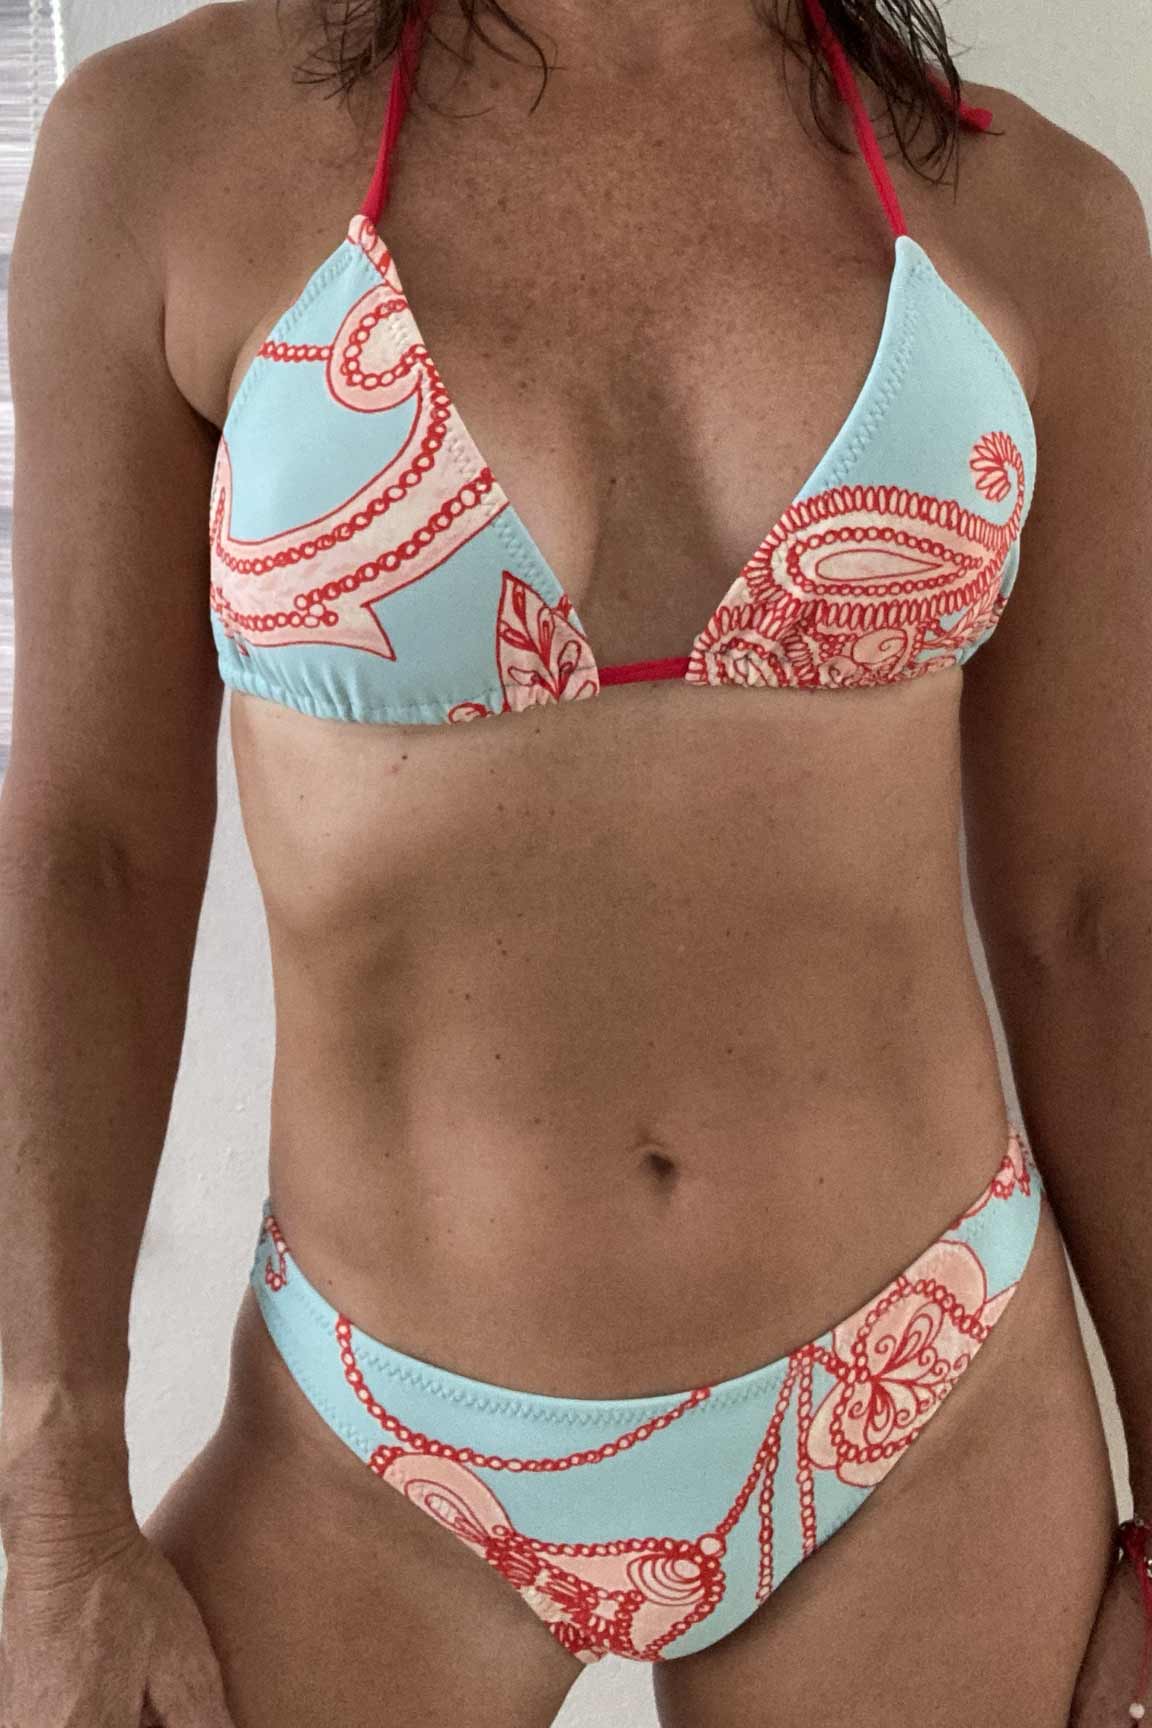 Enjoy days at the beach or pool in this super cute classic bikini bottom with scrunch. Jilles Bikinis are always made with the finest quality of soft and stretchy Lycra to achieve the best fit. Order yours today. @jillesbikinis 